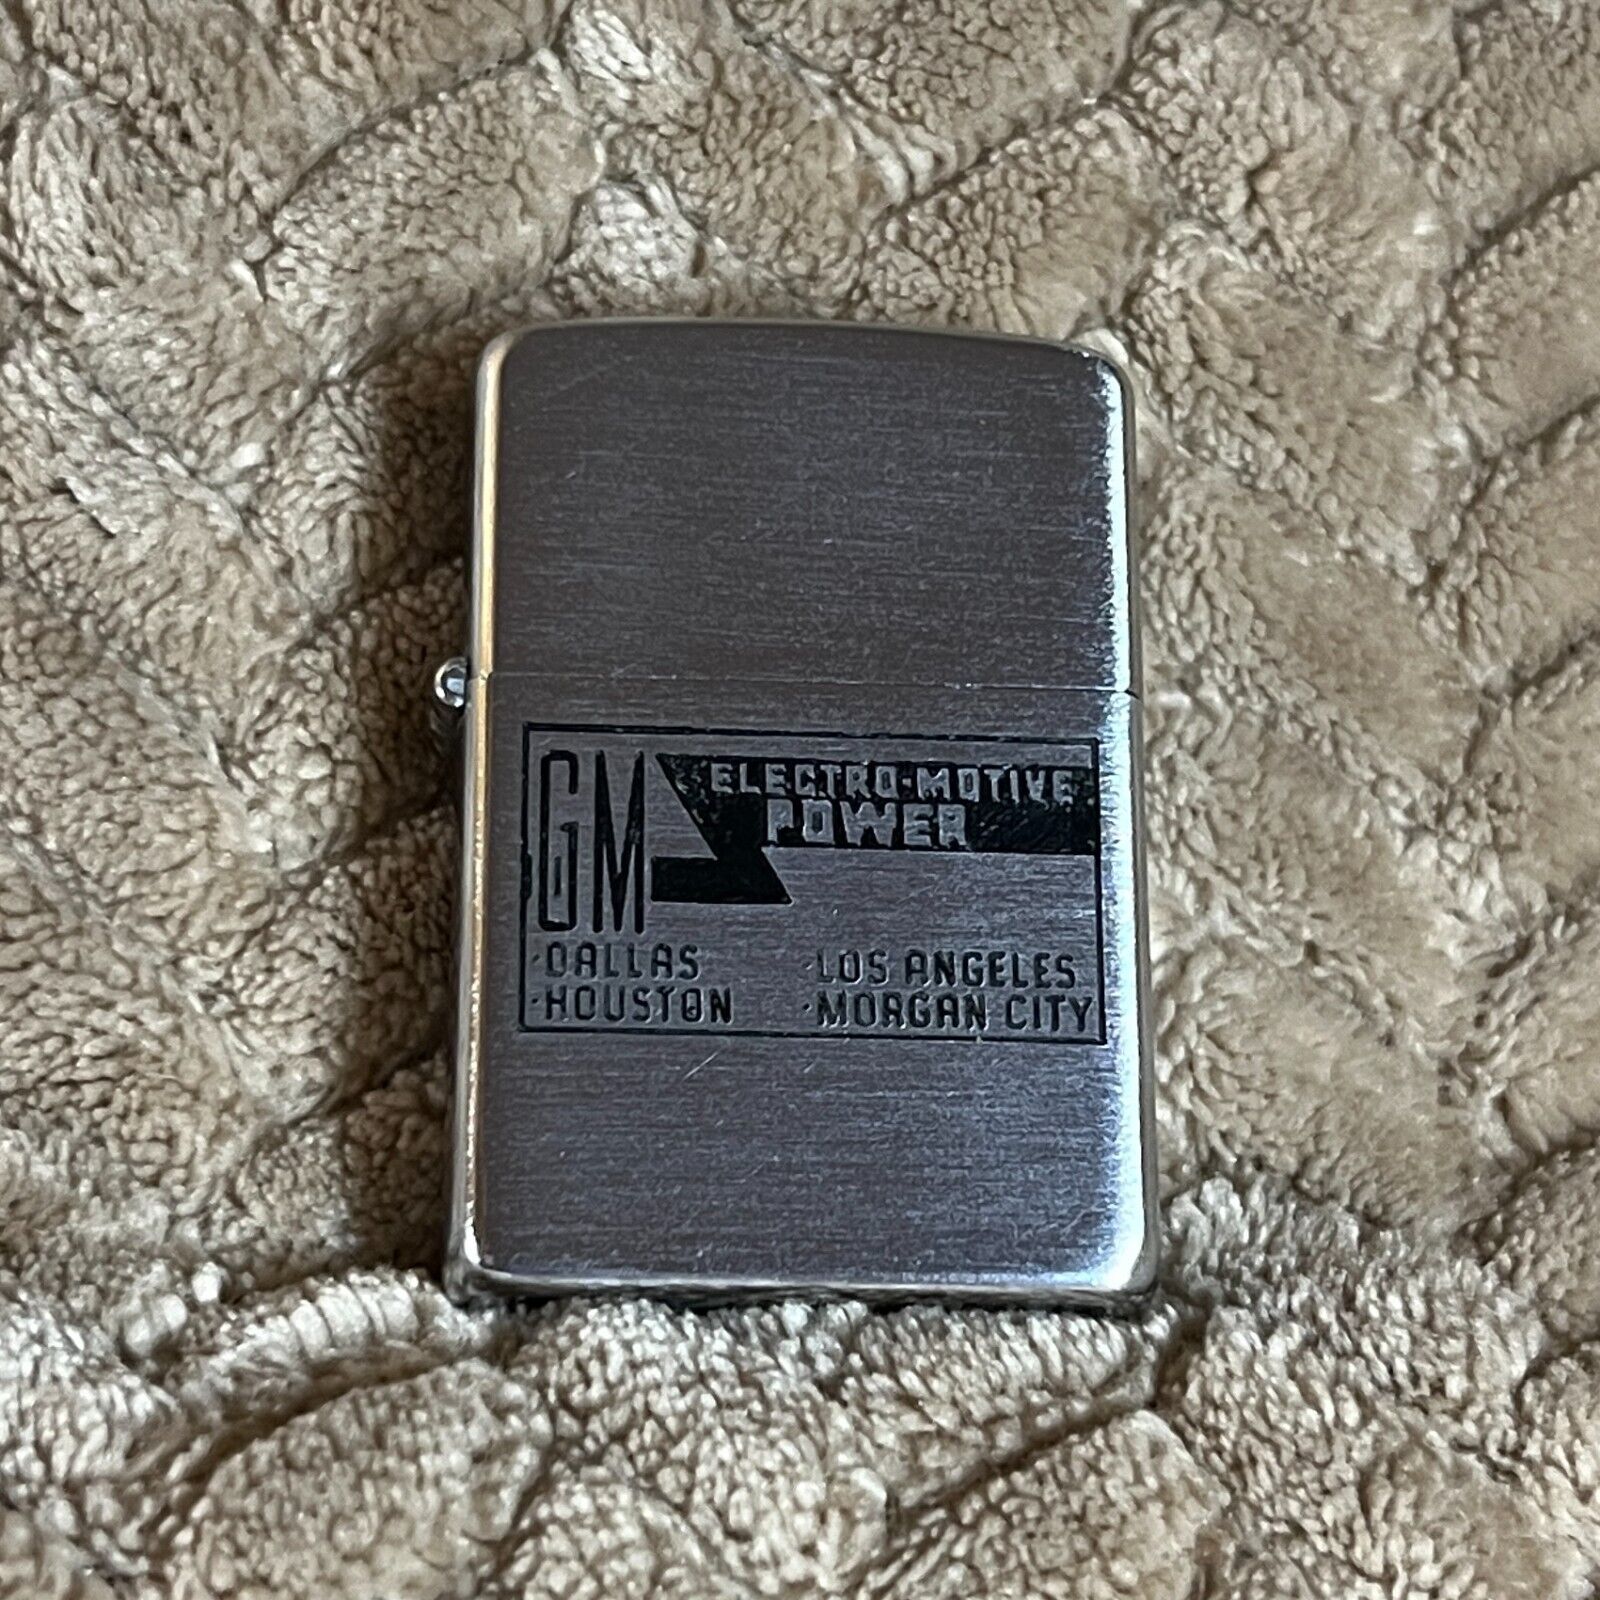 1956 Zippo, Double Sided “GM ELECTRO MOTIVE POWER / for oil well drilling”